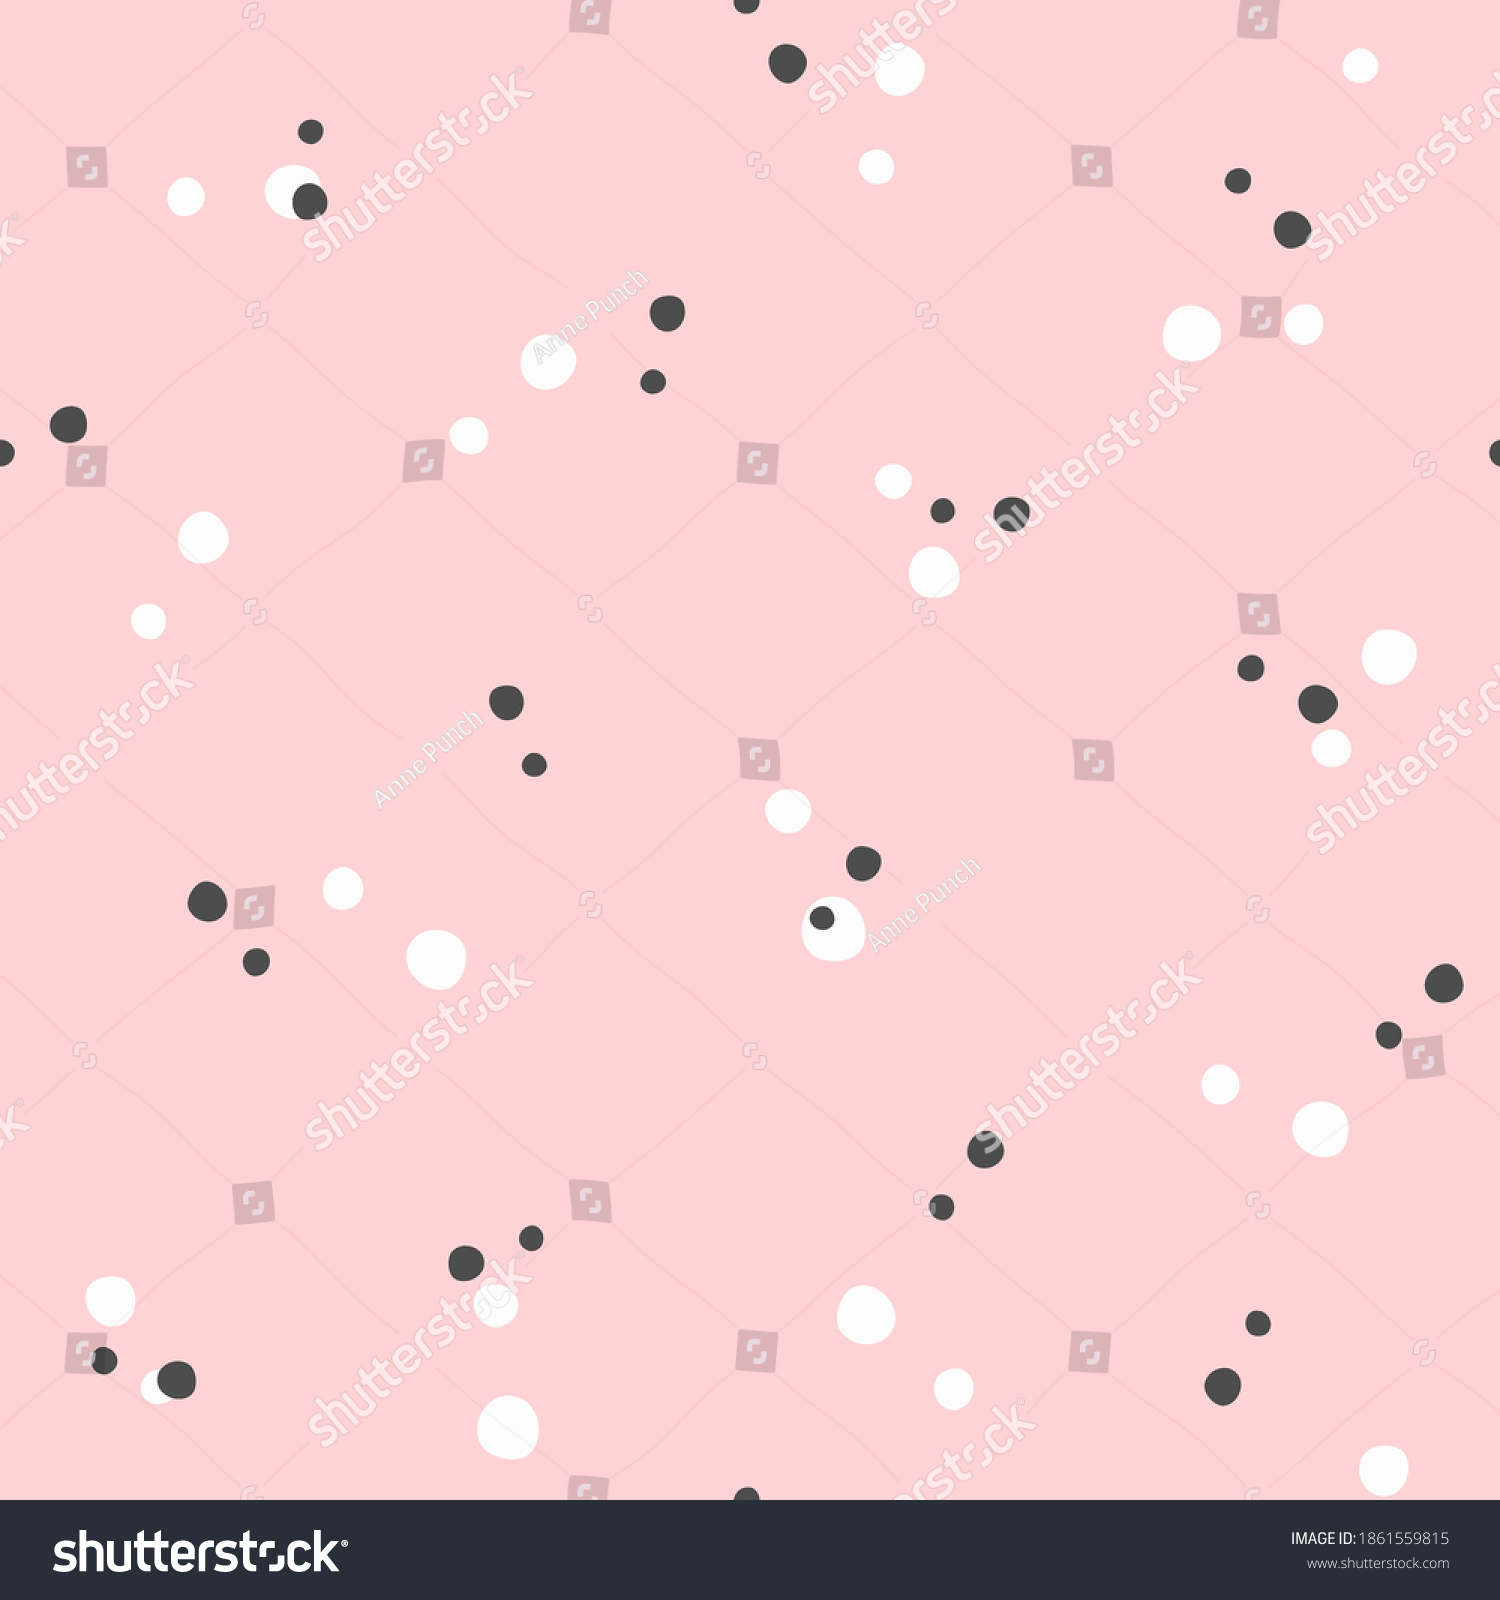 Scattered dot pattern Images, Stock Photos & Vectors | Shutterstock